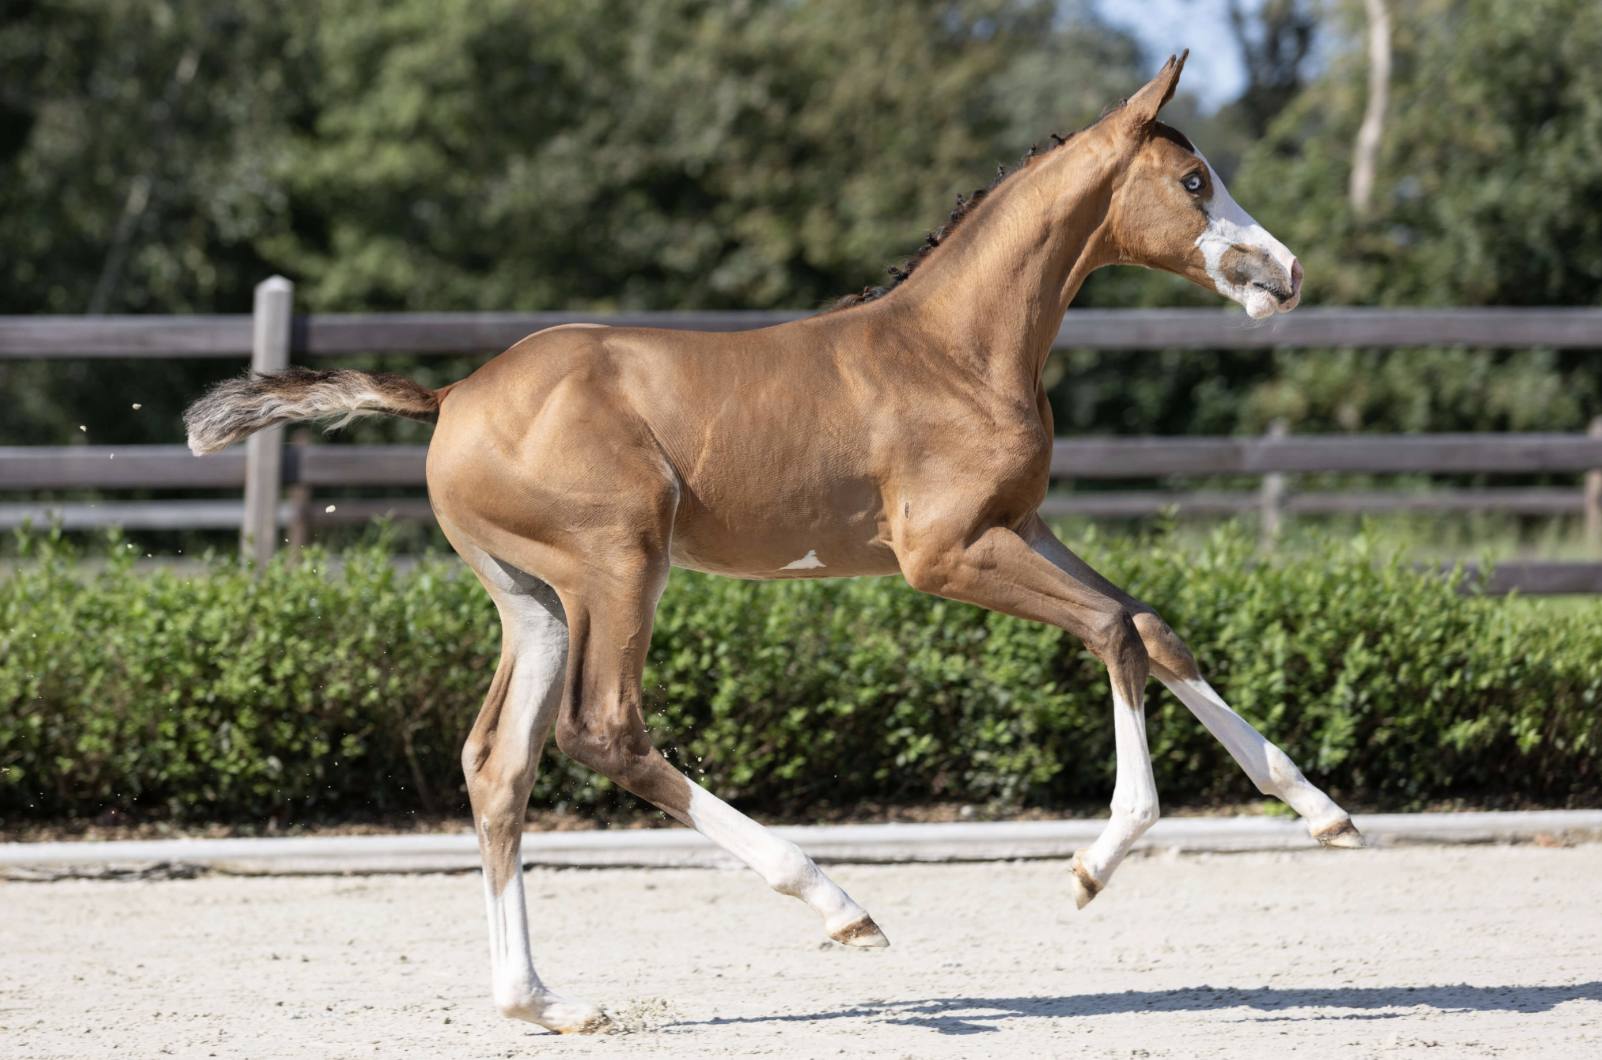 Belgian Champion, Ermitage Kalone is main sire in exclusive foal collection Equestrian-Auctions.com!